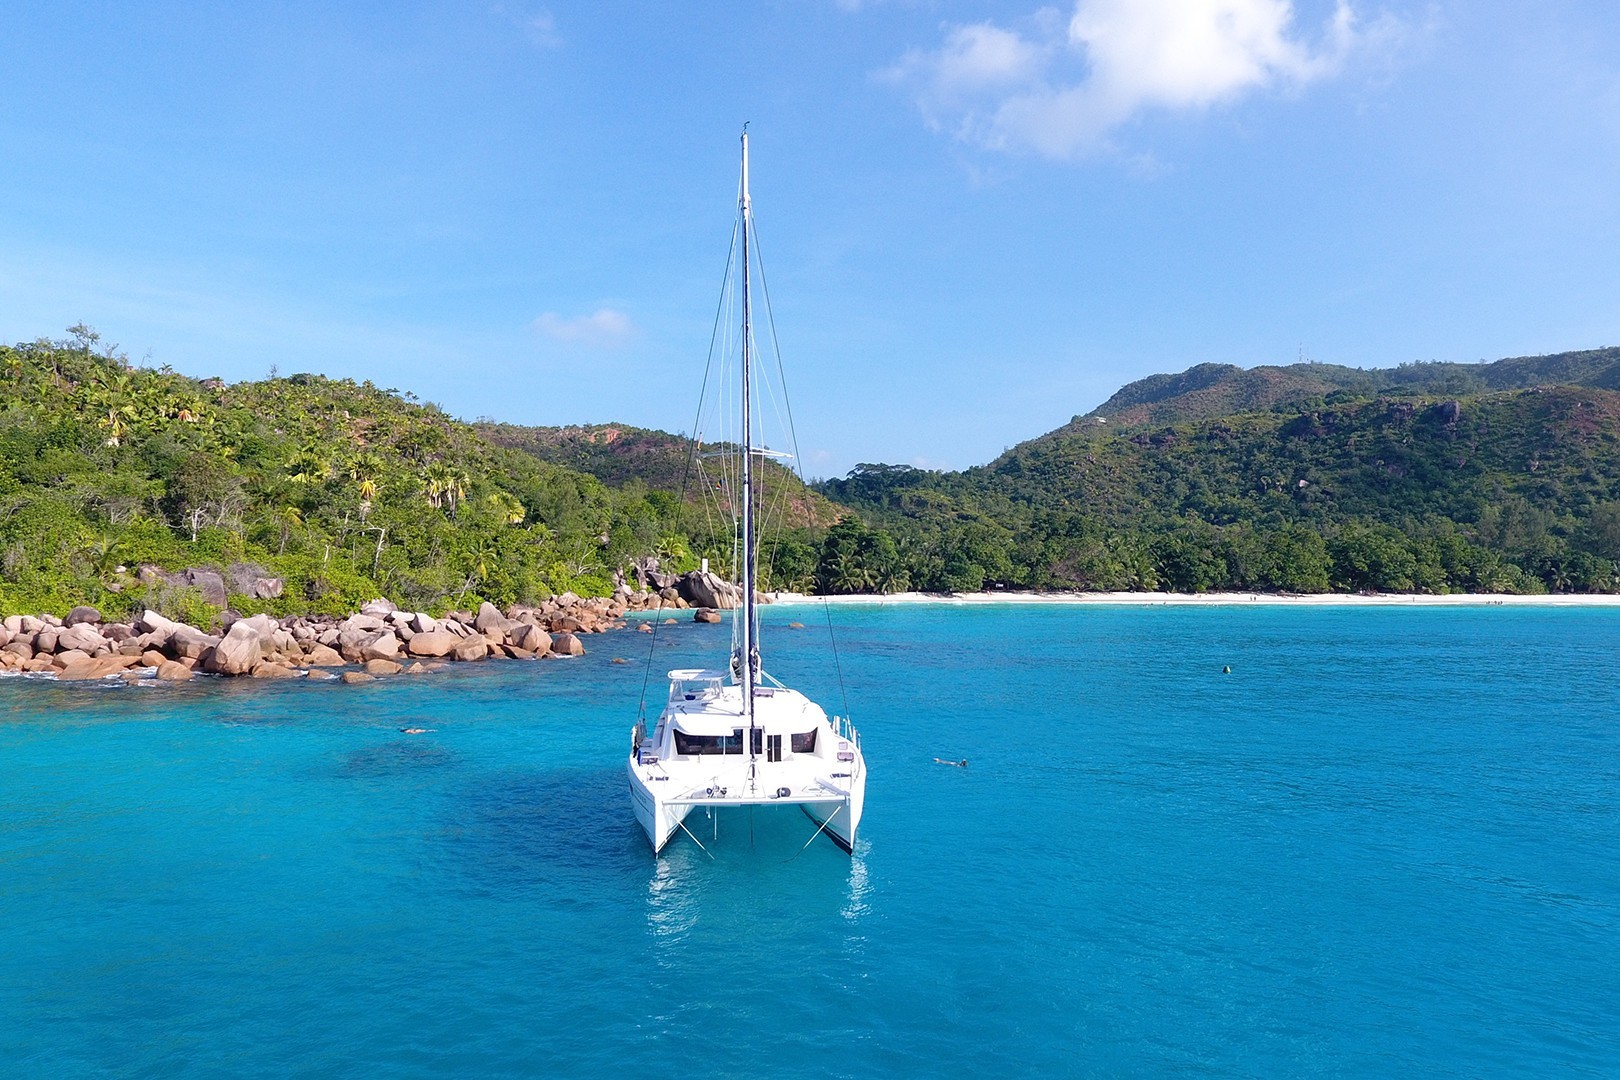 Mini Catamaran Cruises: An Unforgettable Experience of Hidden Paradises, Romance, and Absolute Freedom